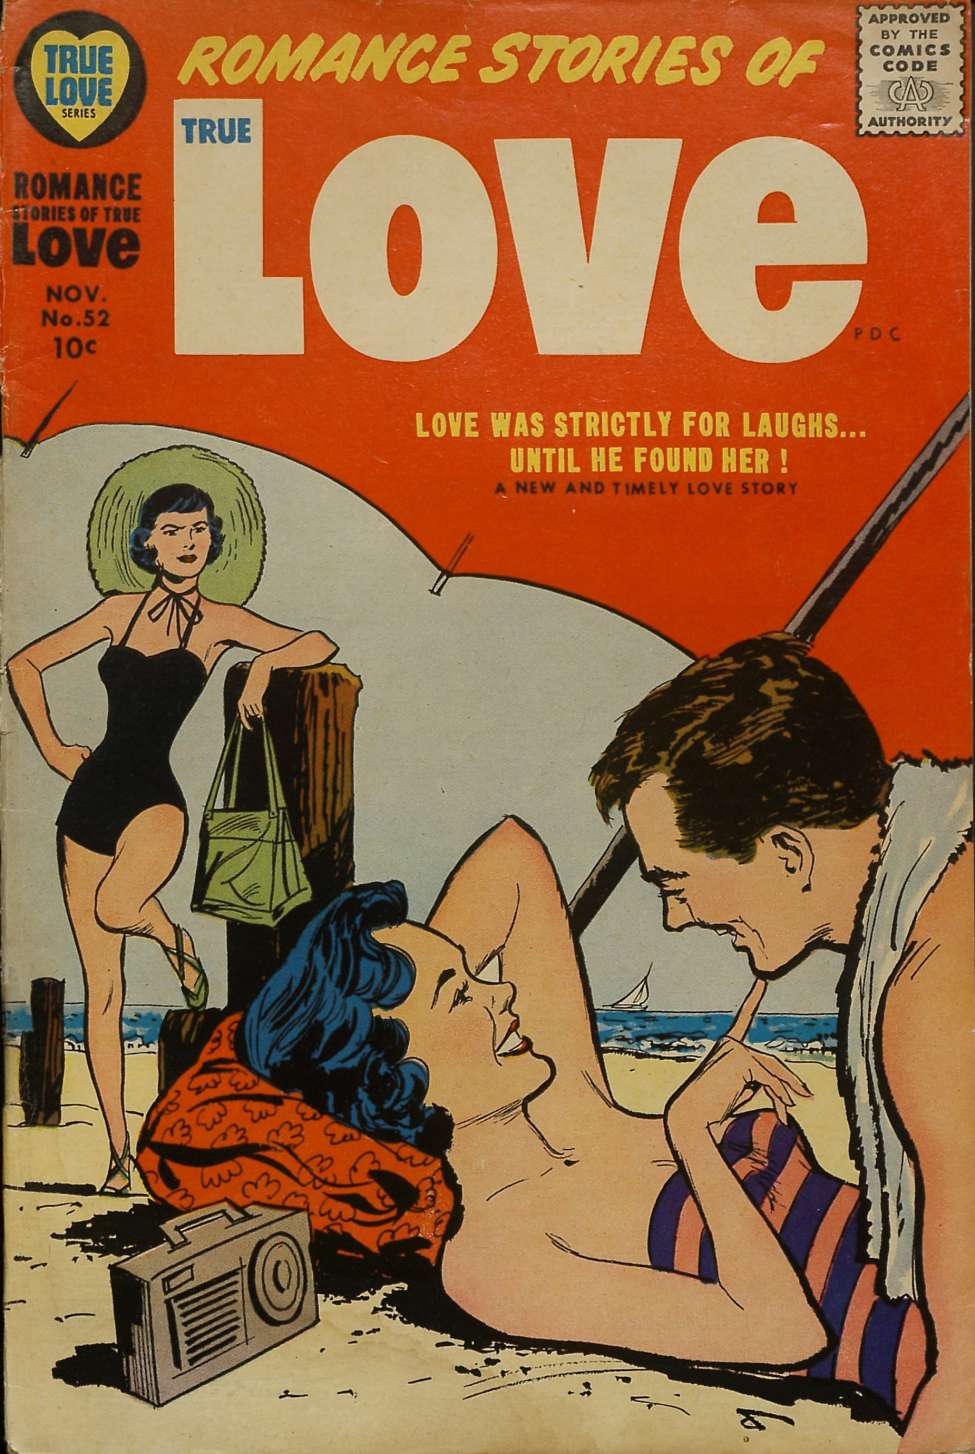 Comic Book Cover For Romance Stories of True Love 52